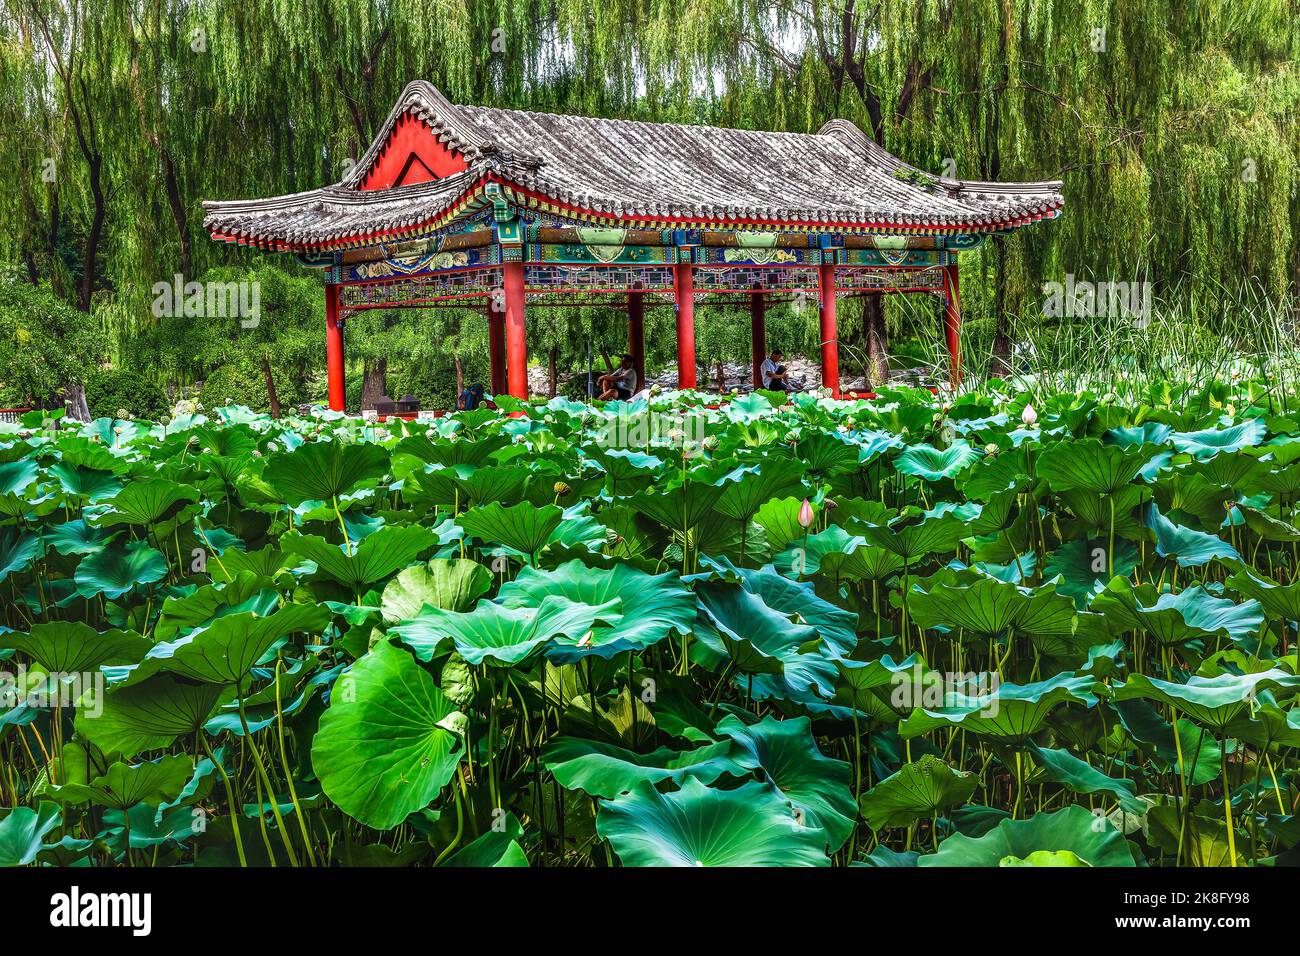 Red Pavilion Lotus Pads Garden Temple of Sun City Park Beijing China Willow Green Trees Stock Photo